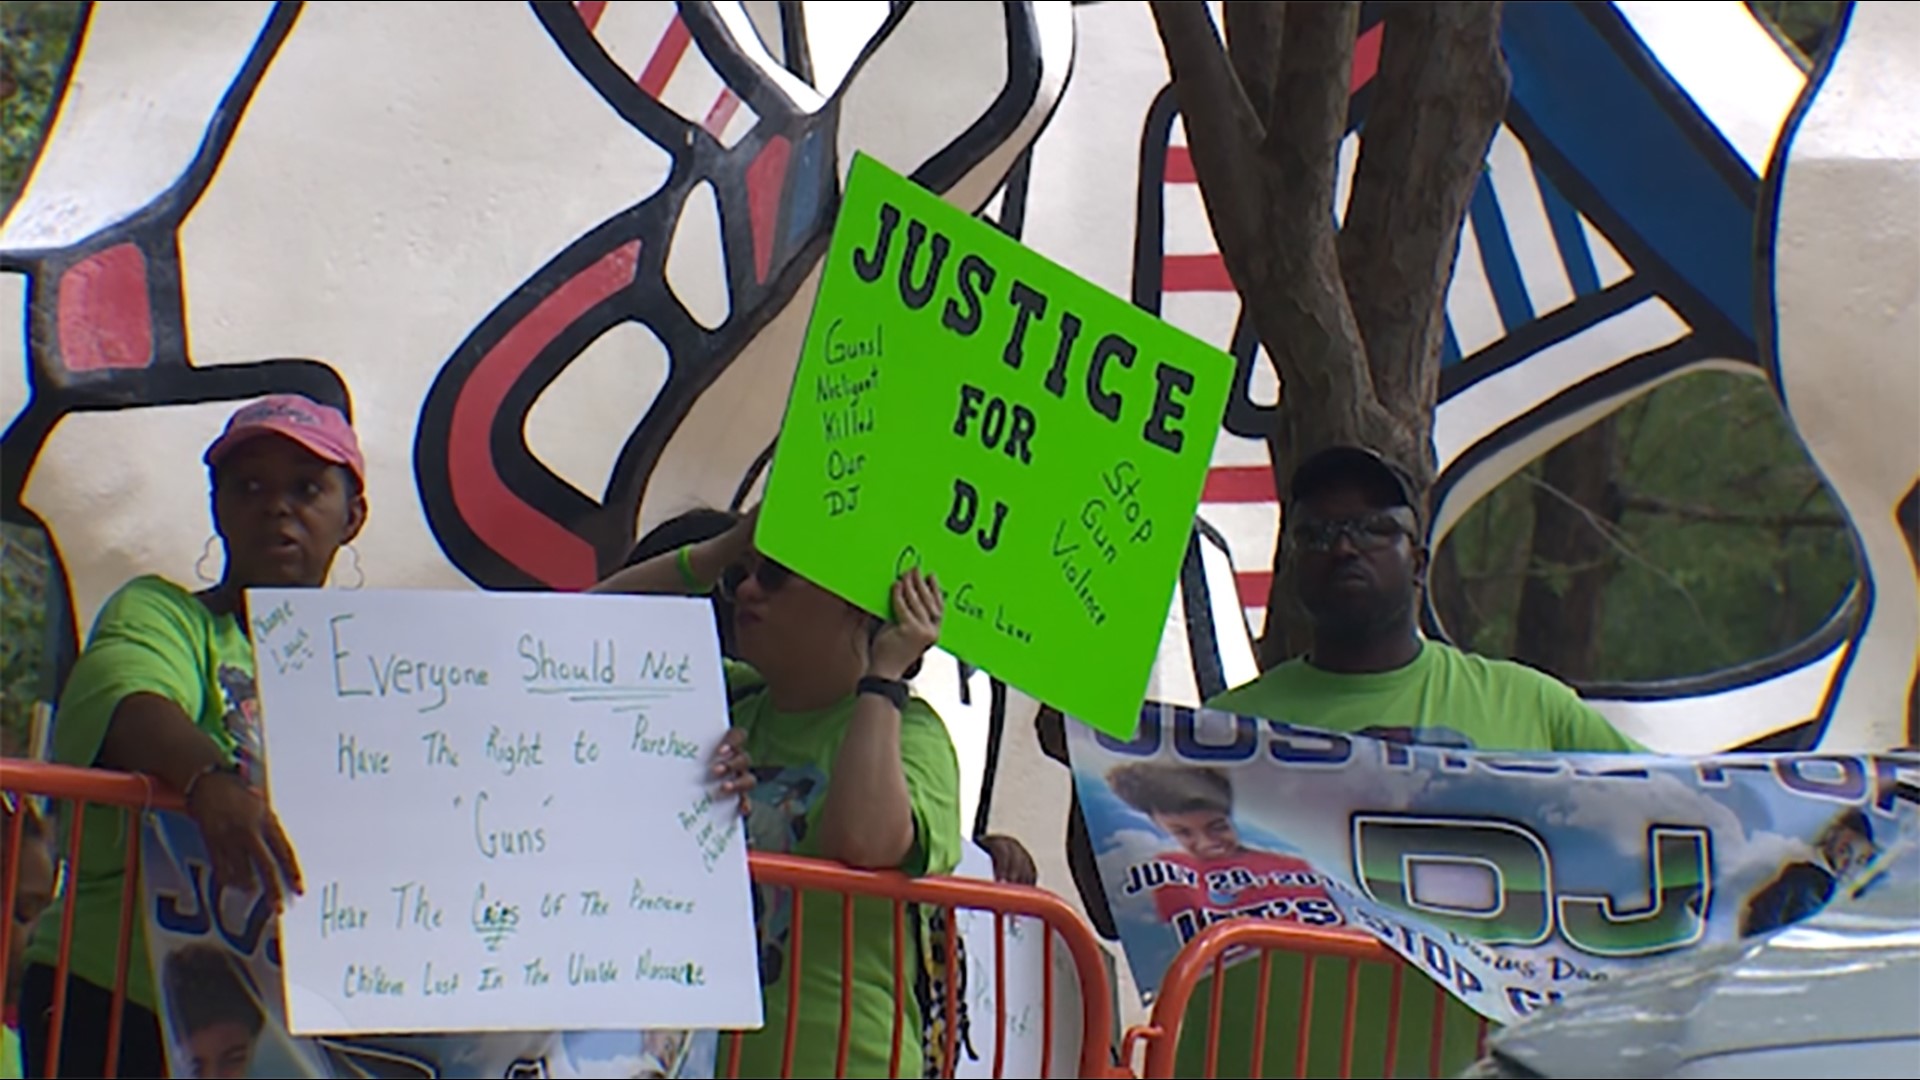 On the final day of the NRA convention in Houston, protesters, including DJ Dugas' mother, gathered outside.